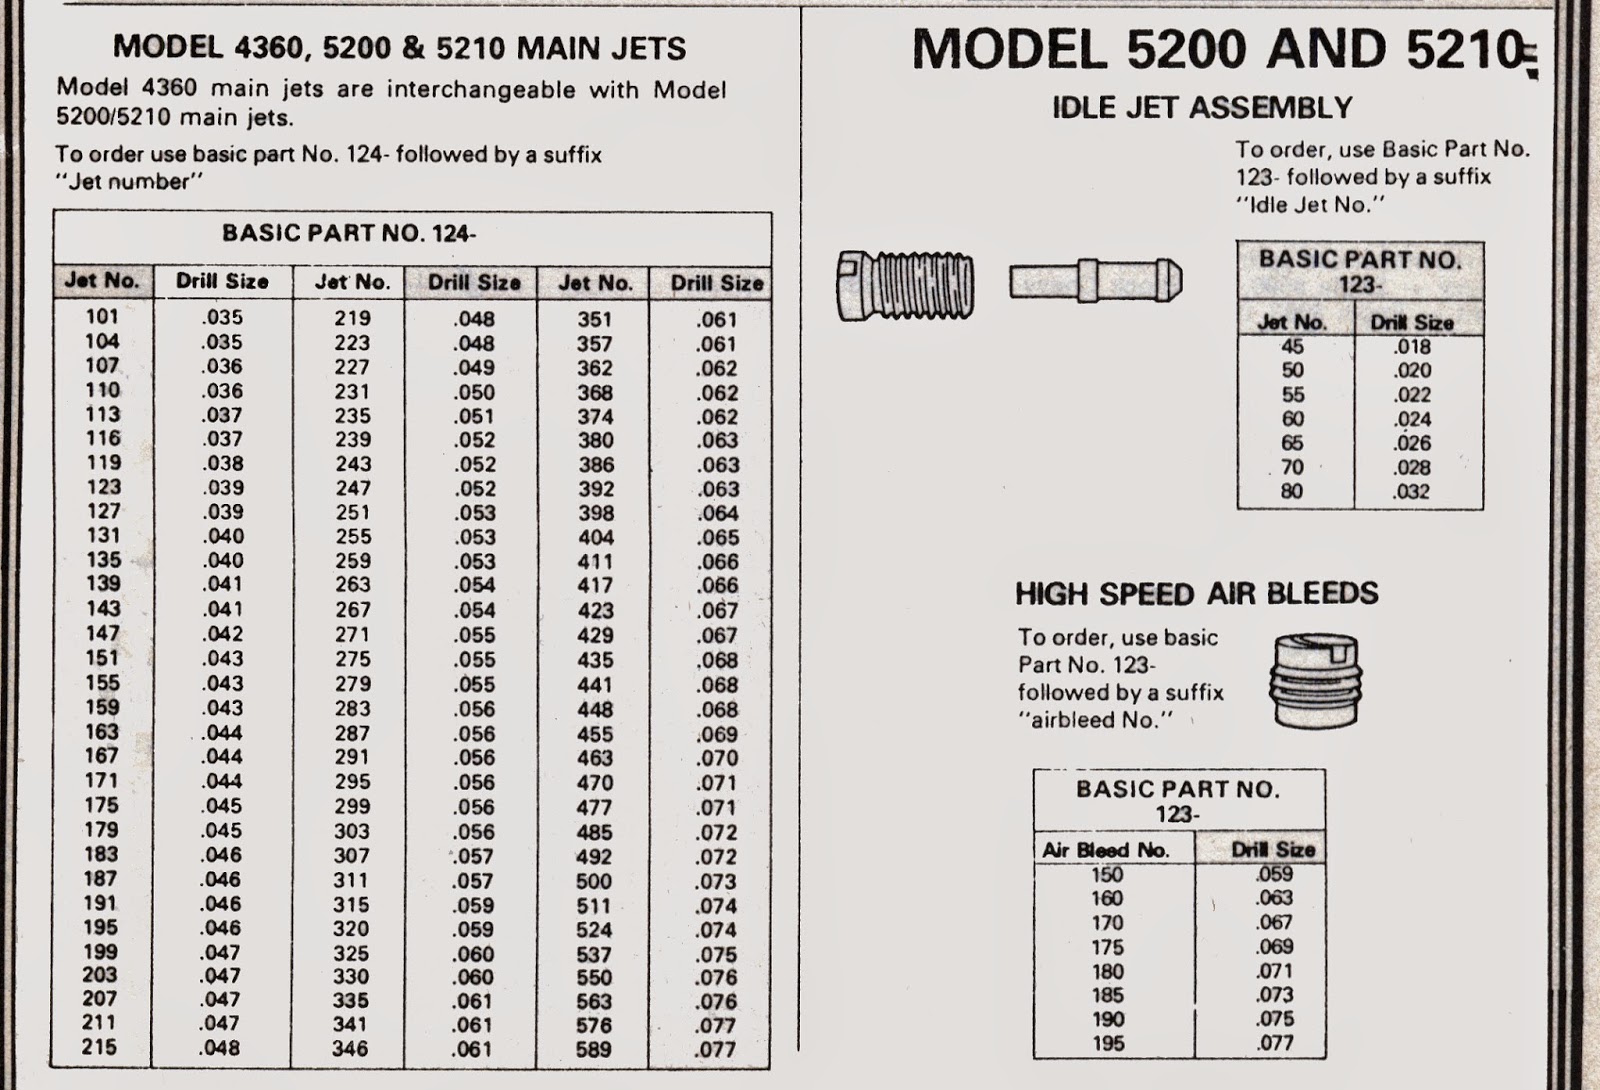 Holley Carb Chart